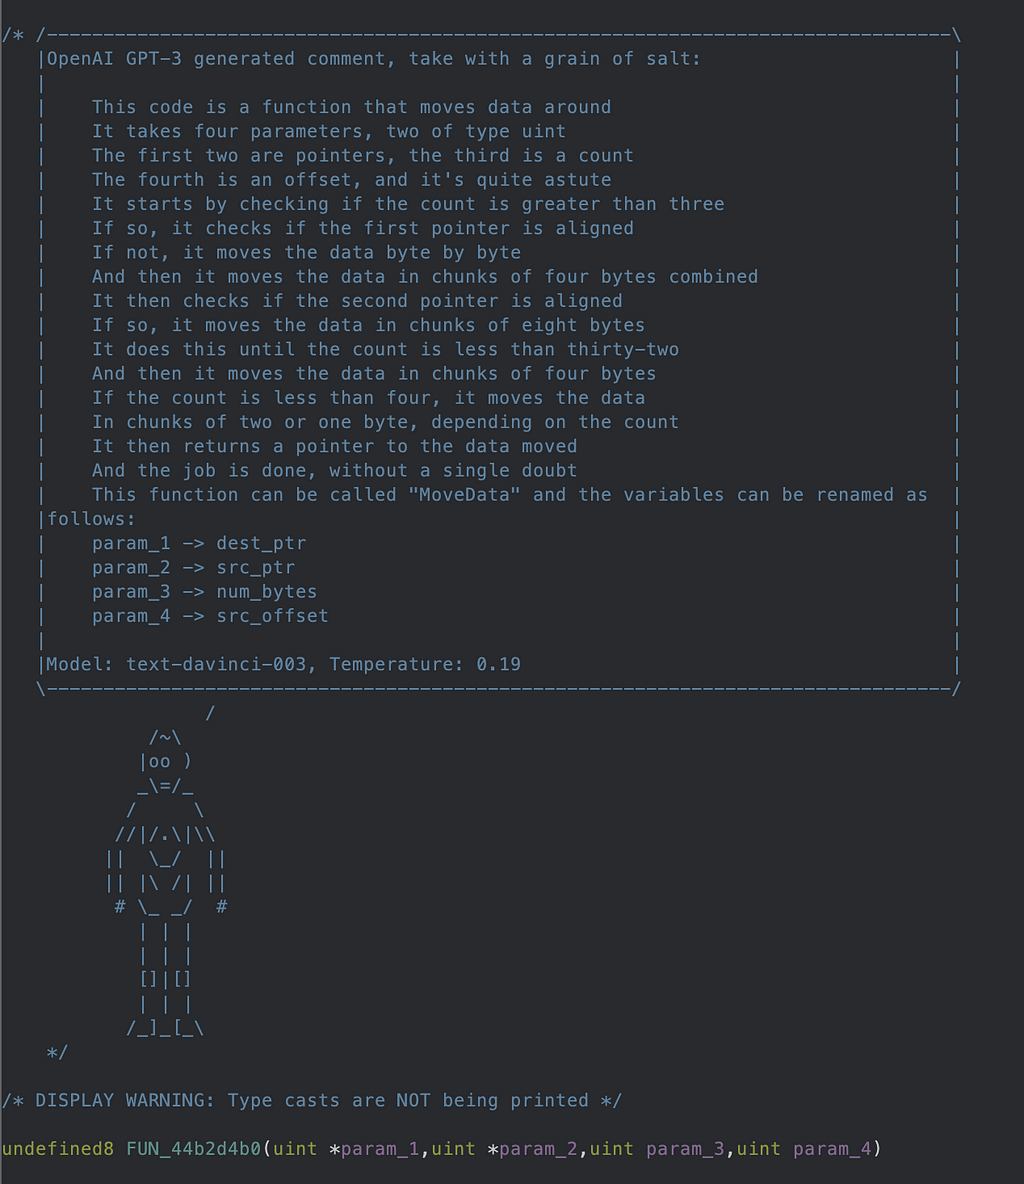 A screenshot of G-3PO glossing a function in sonnet form.